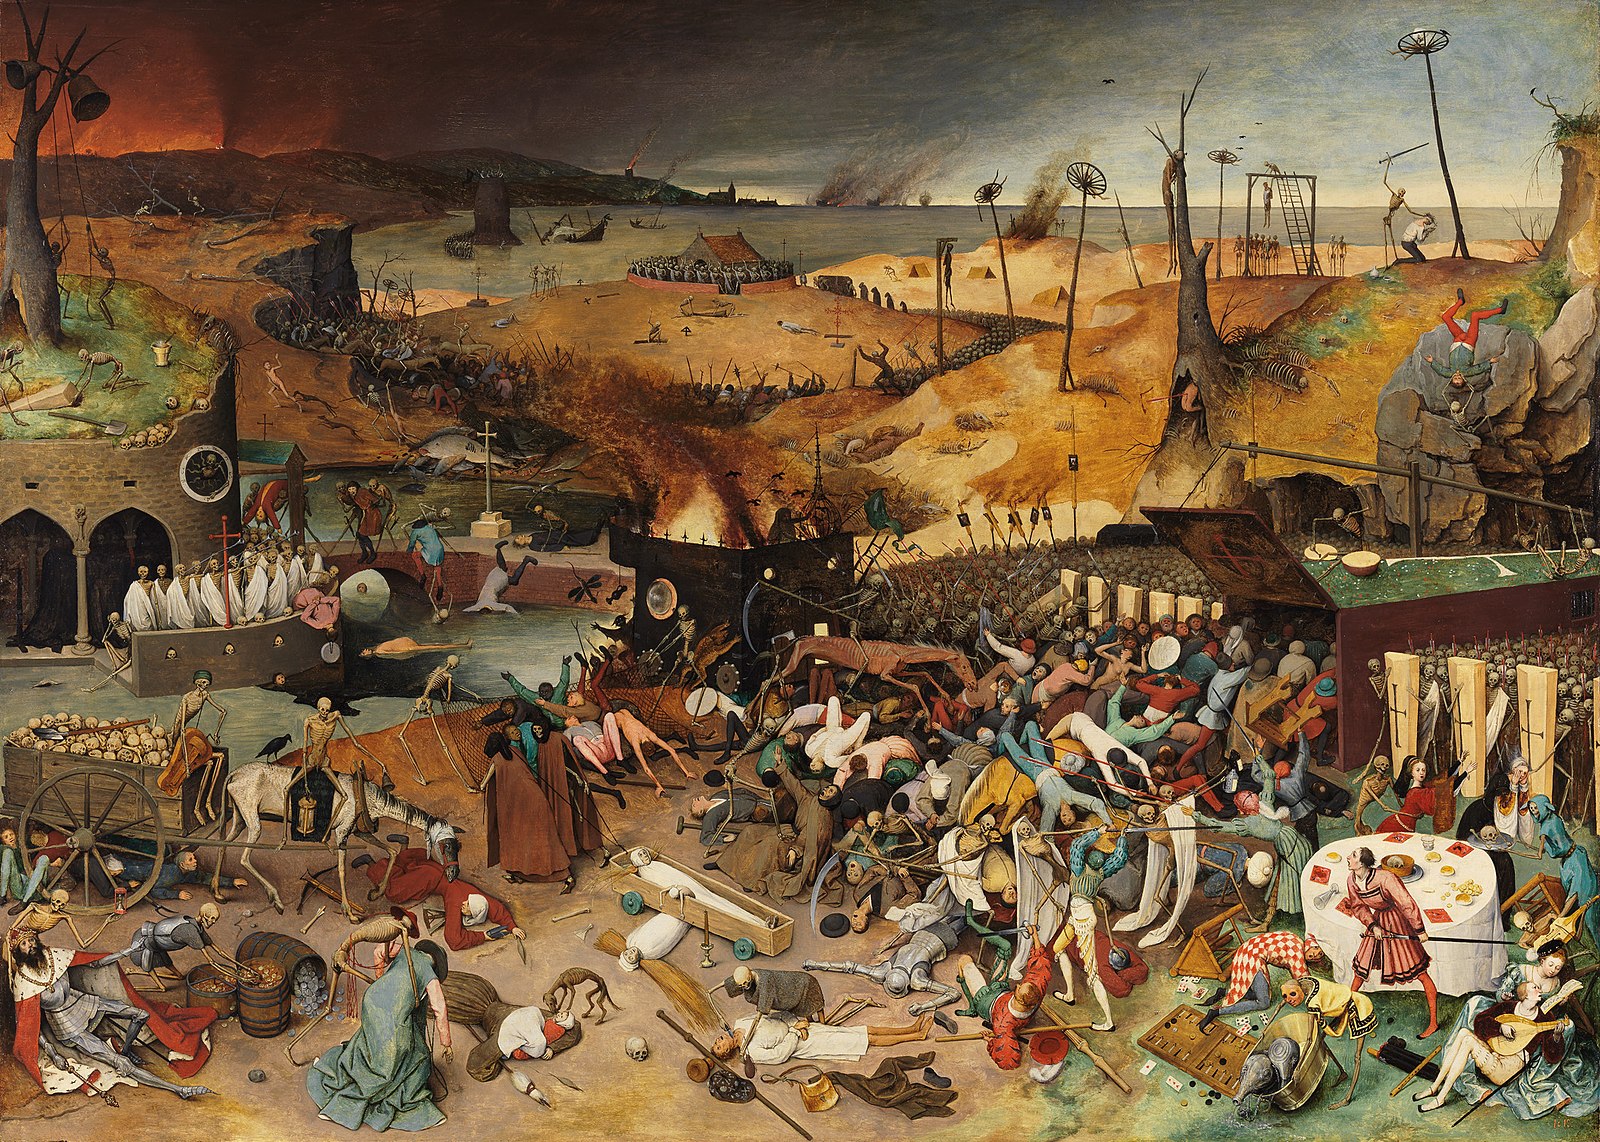 Pieter Bruegel the Elder's 1562 painting 'The Triumph of Death' depicts the turmoil Europe experienced as a result of the plague